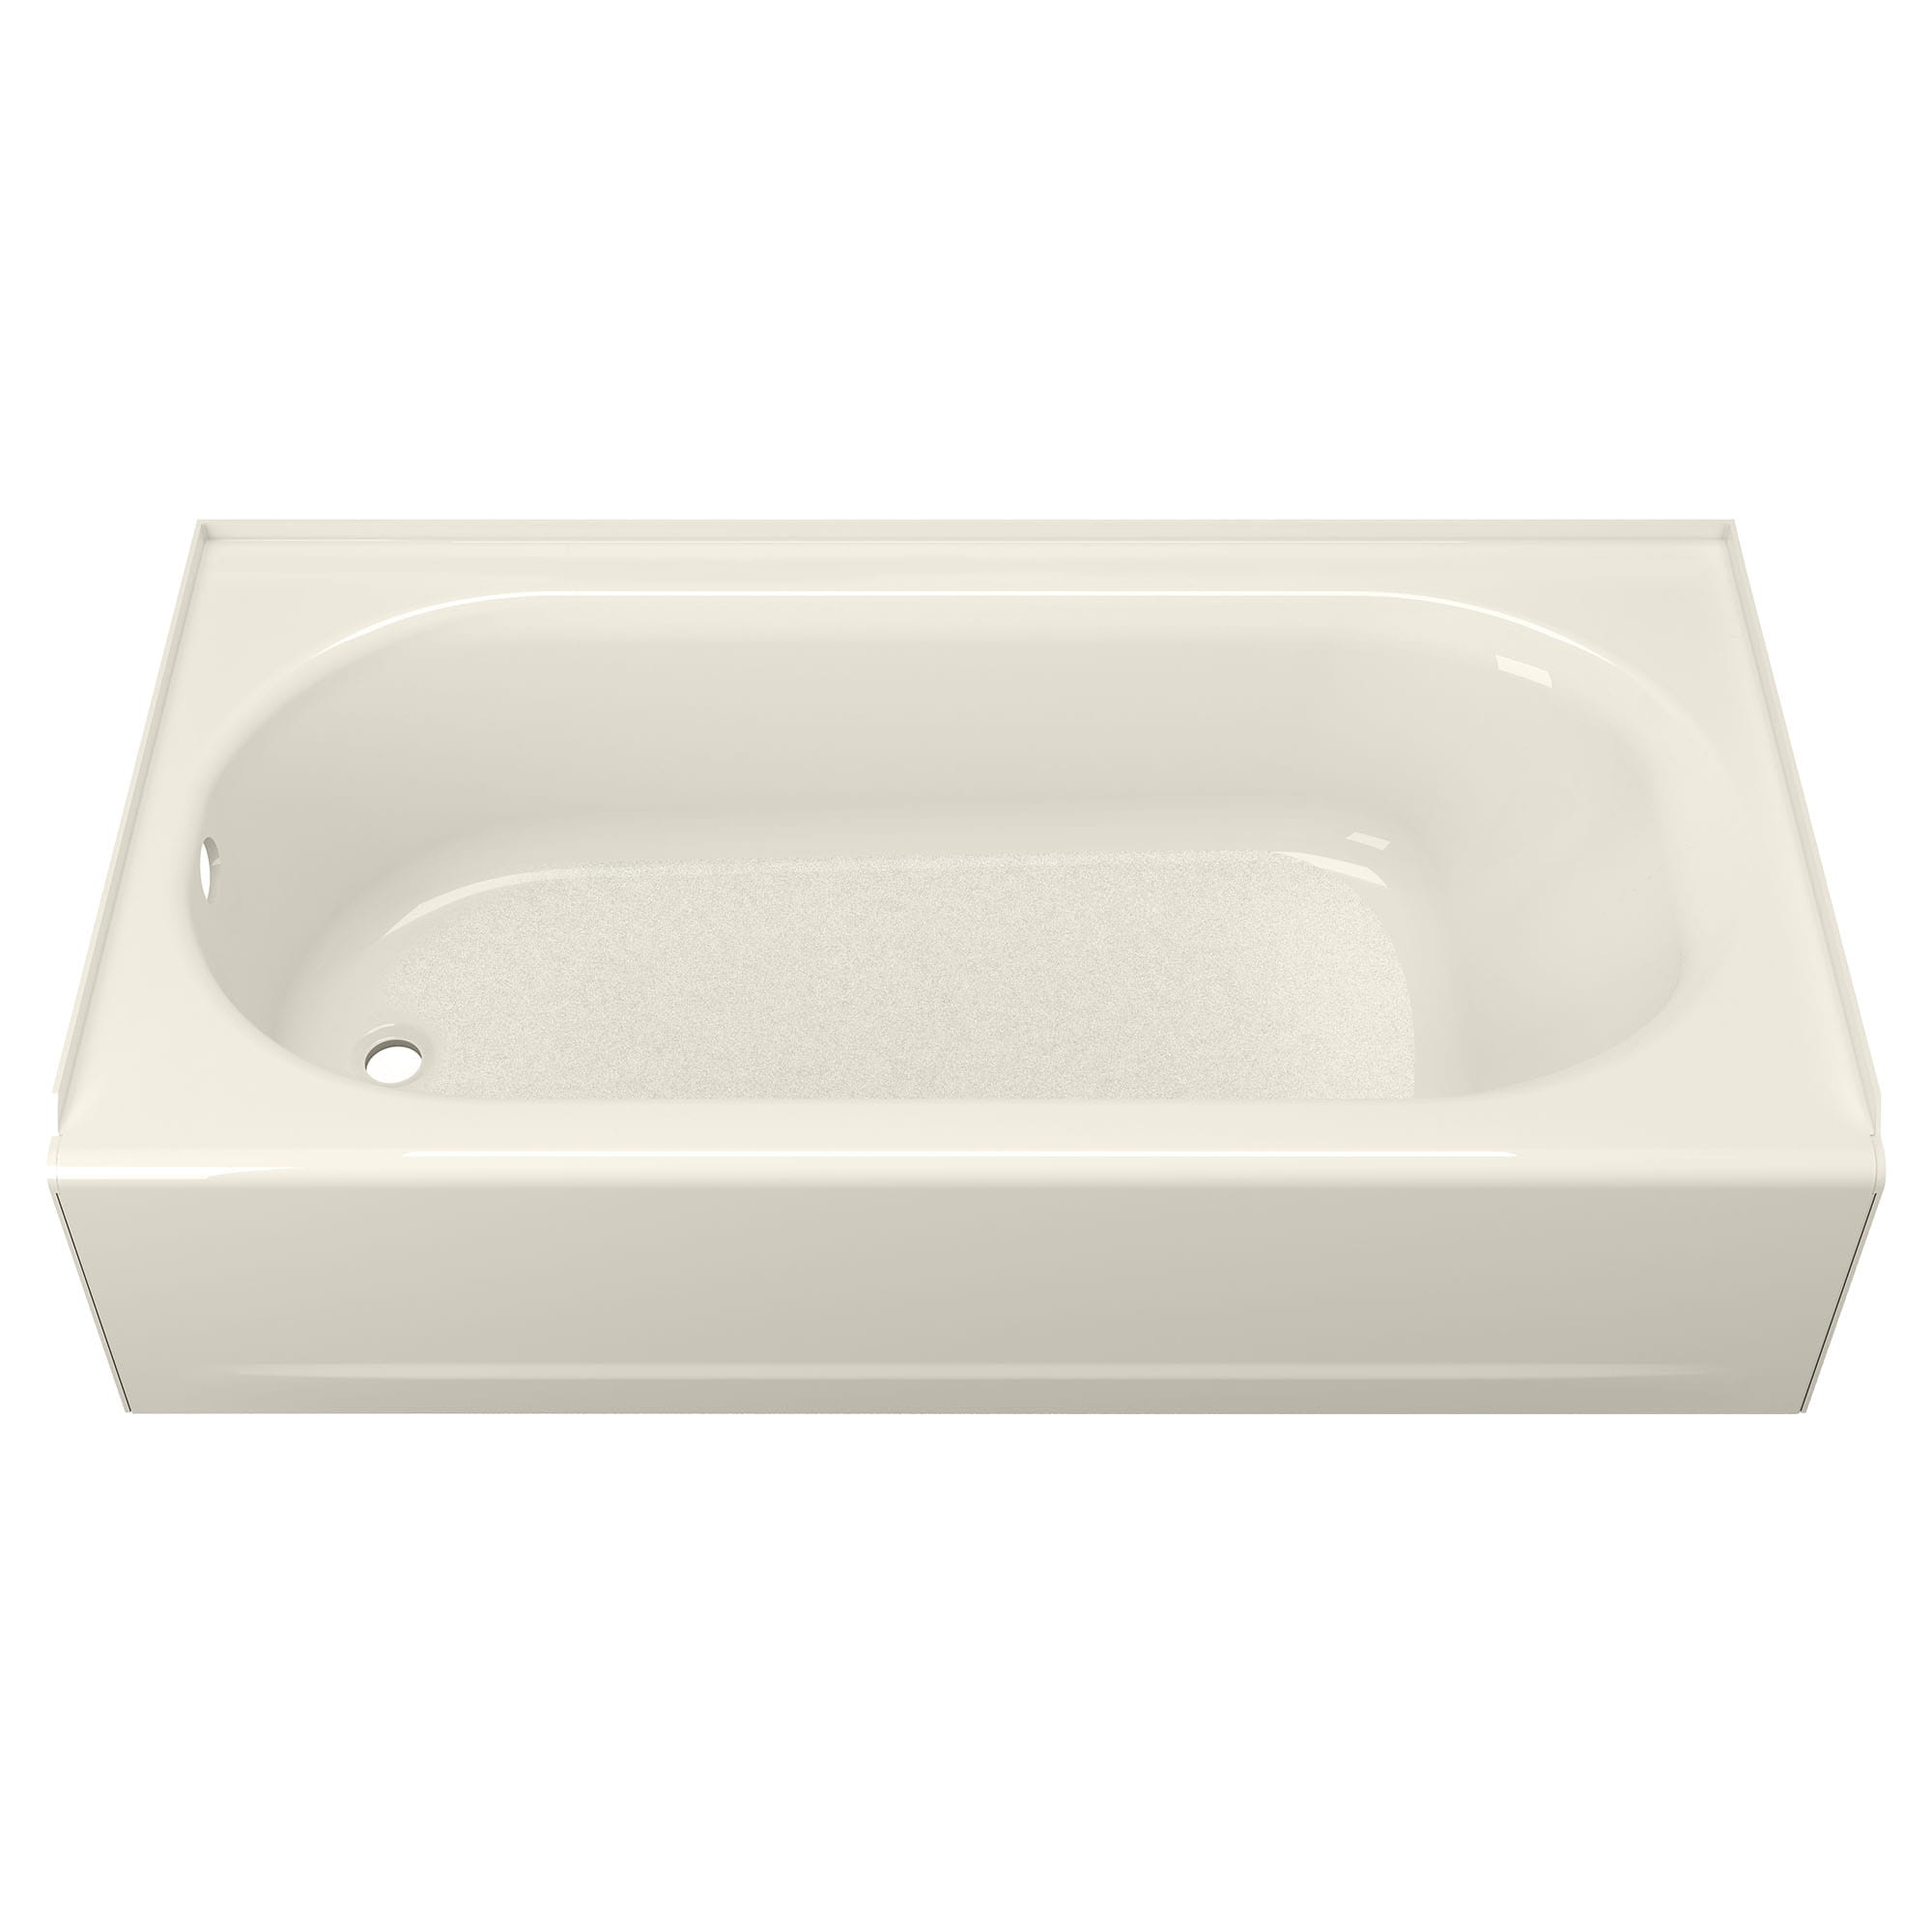 Princeton Americast 60 x 34 Inch Integral Apron Bathtub Left Hand Outlet With Luxury Ledge LINEN